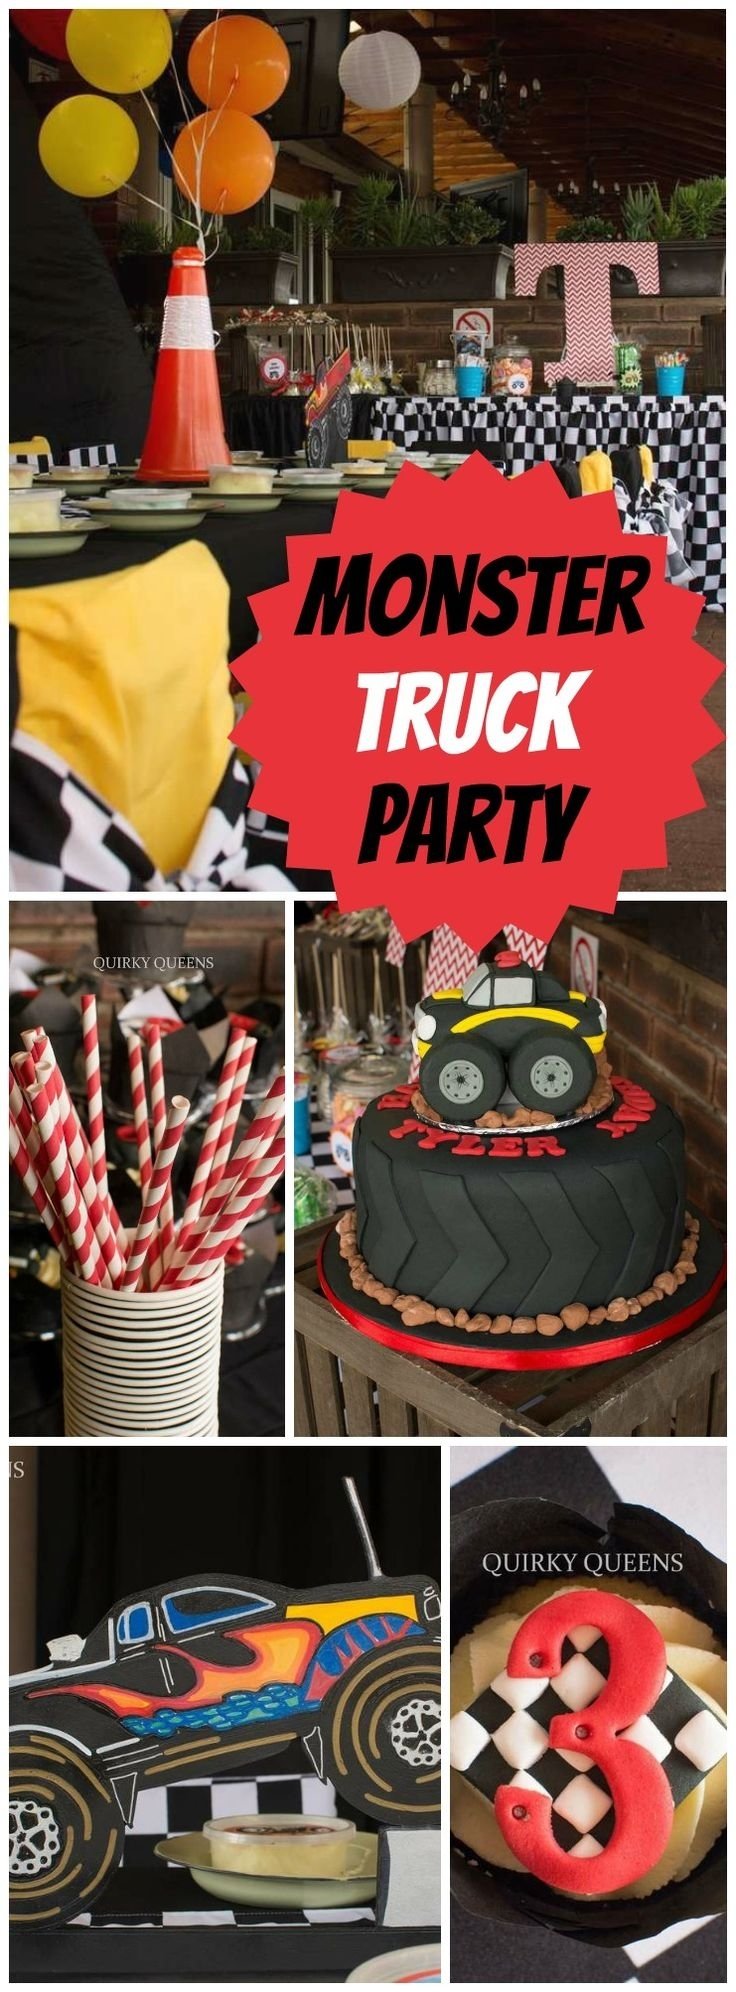 10 Perfect Monster Truck Birthday Party Ideas 58 best monster truck party images on pinterest monster truck 2022